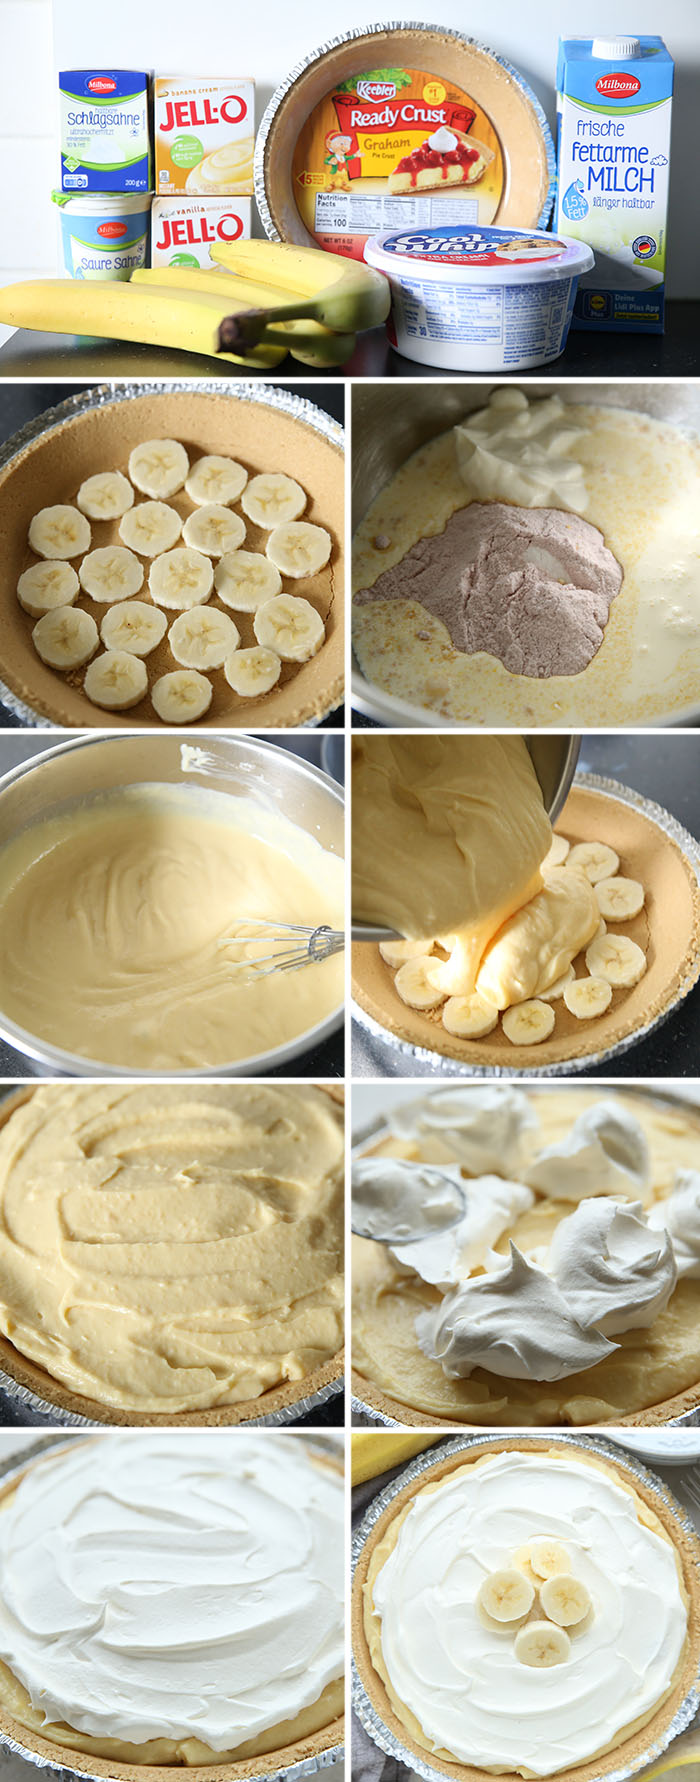 9-photo picture collage of step-by-step photos on how to make Easy No-Bake Banana Cream Pie